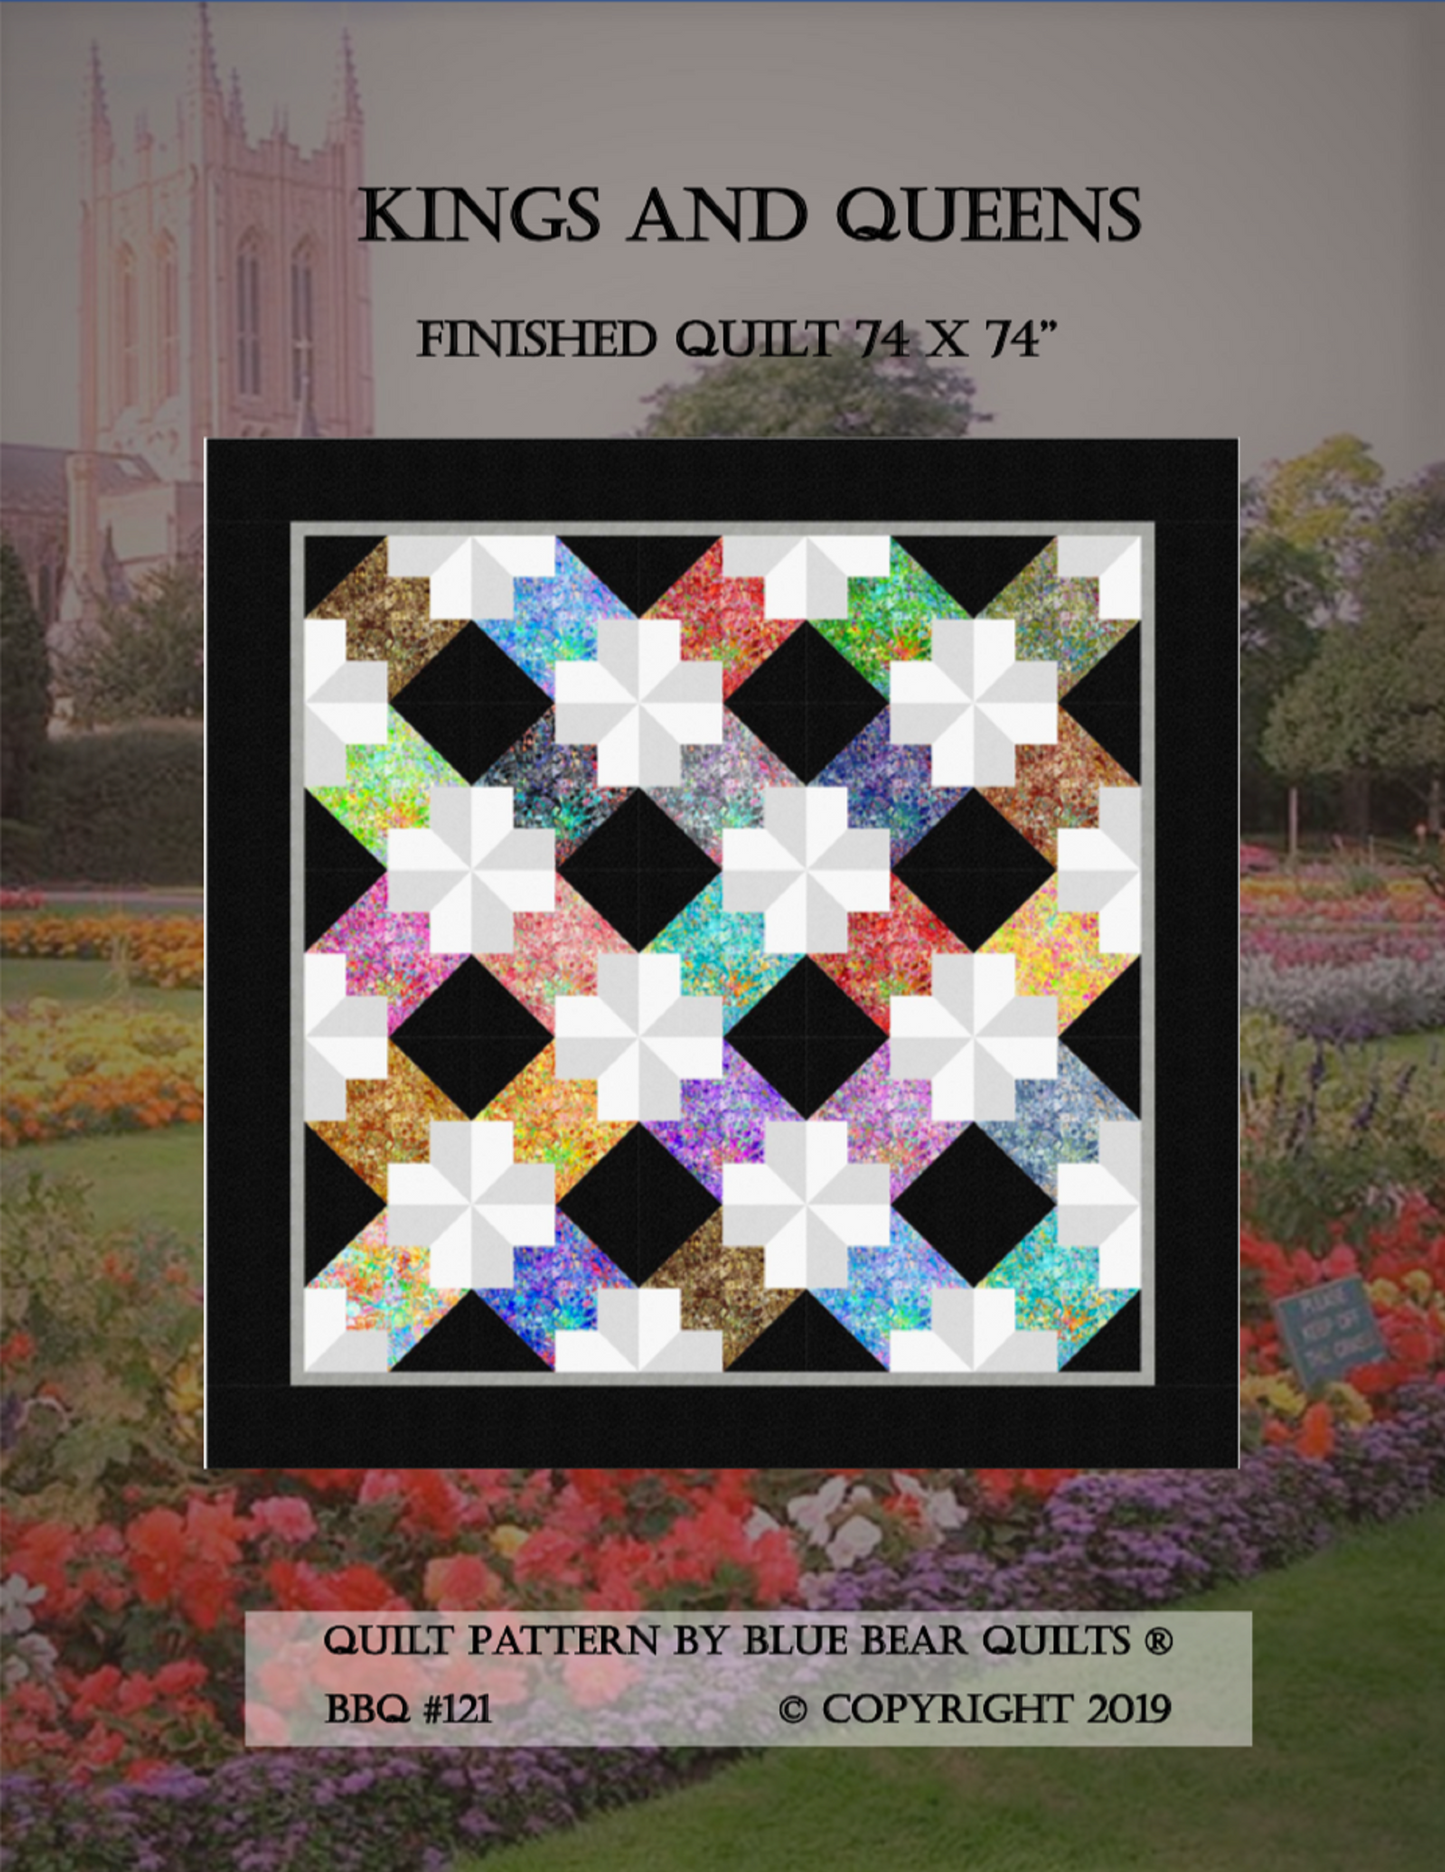 Kings and Queens Quilt Pattern by Blue Bear Quilts